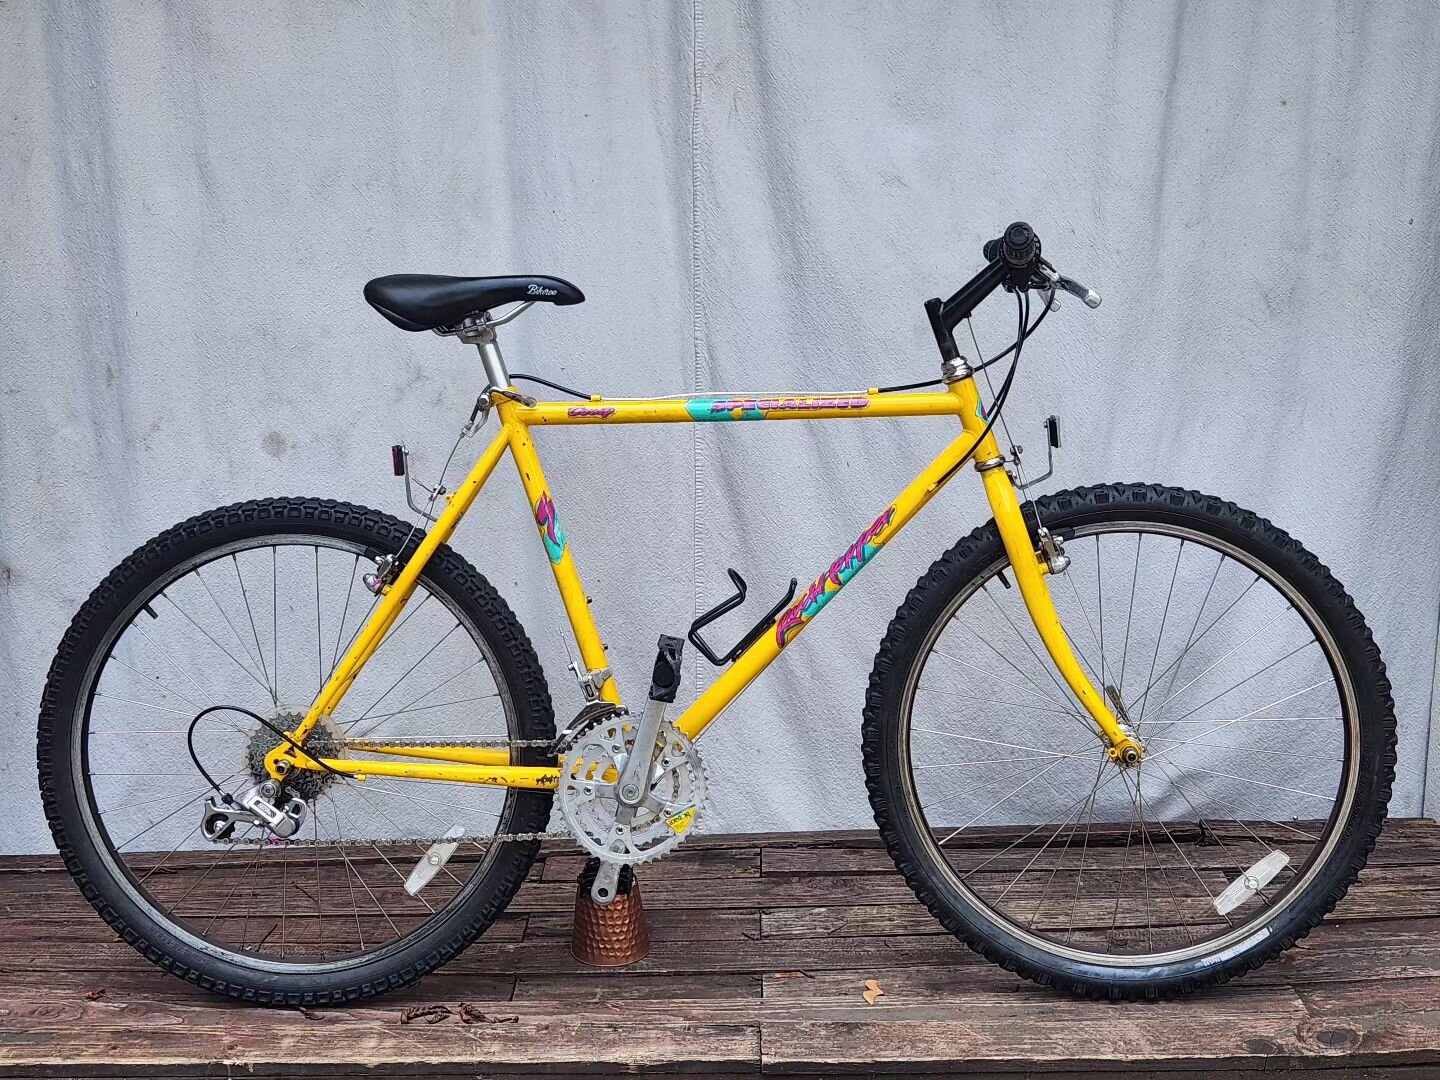 1988 specialized rockhopper customer  restoration. Original with some period correct specialized ground control tires added to keep it looking cool!